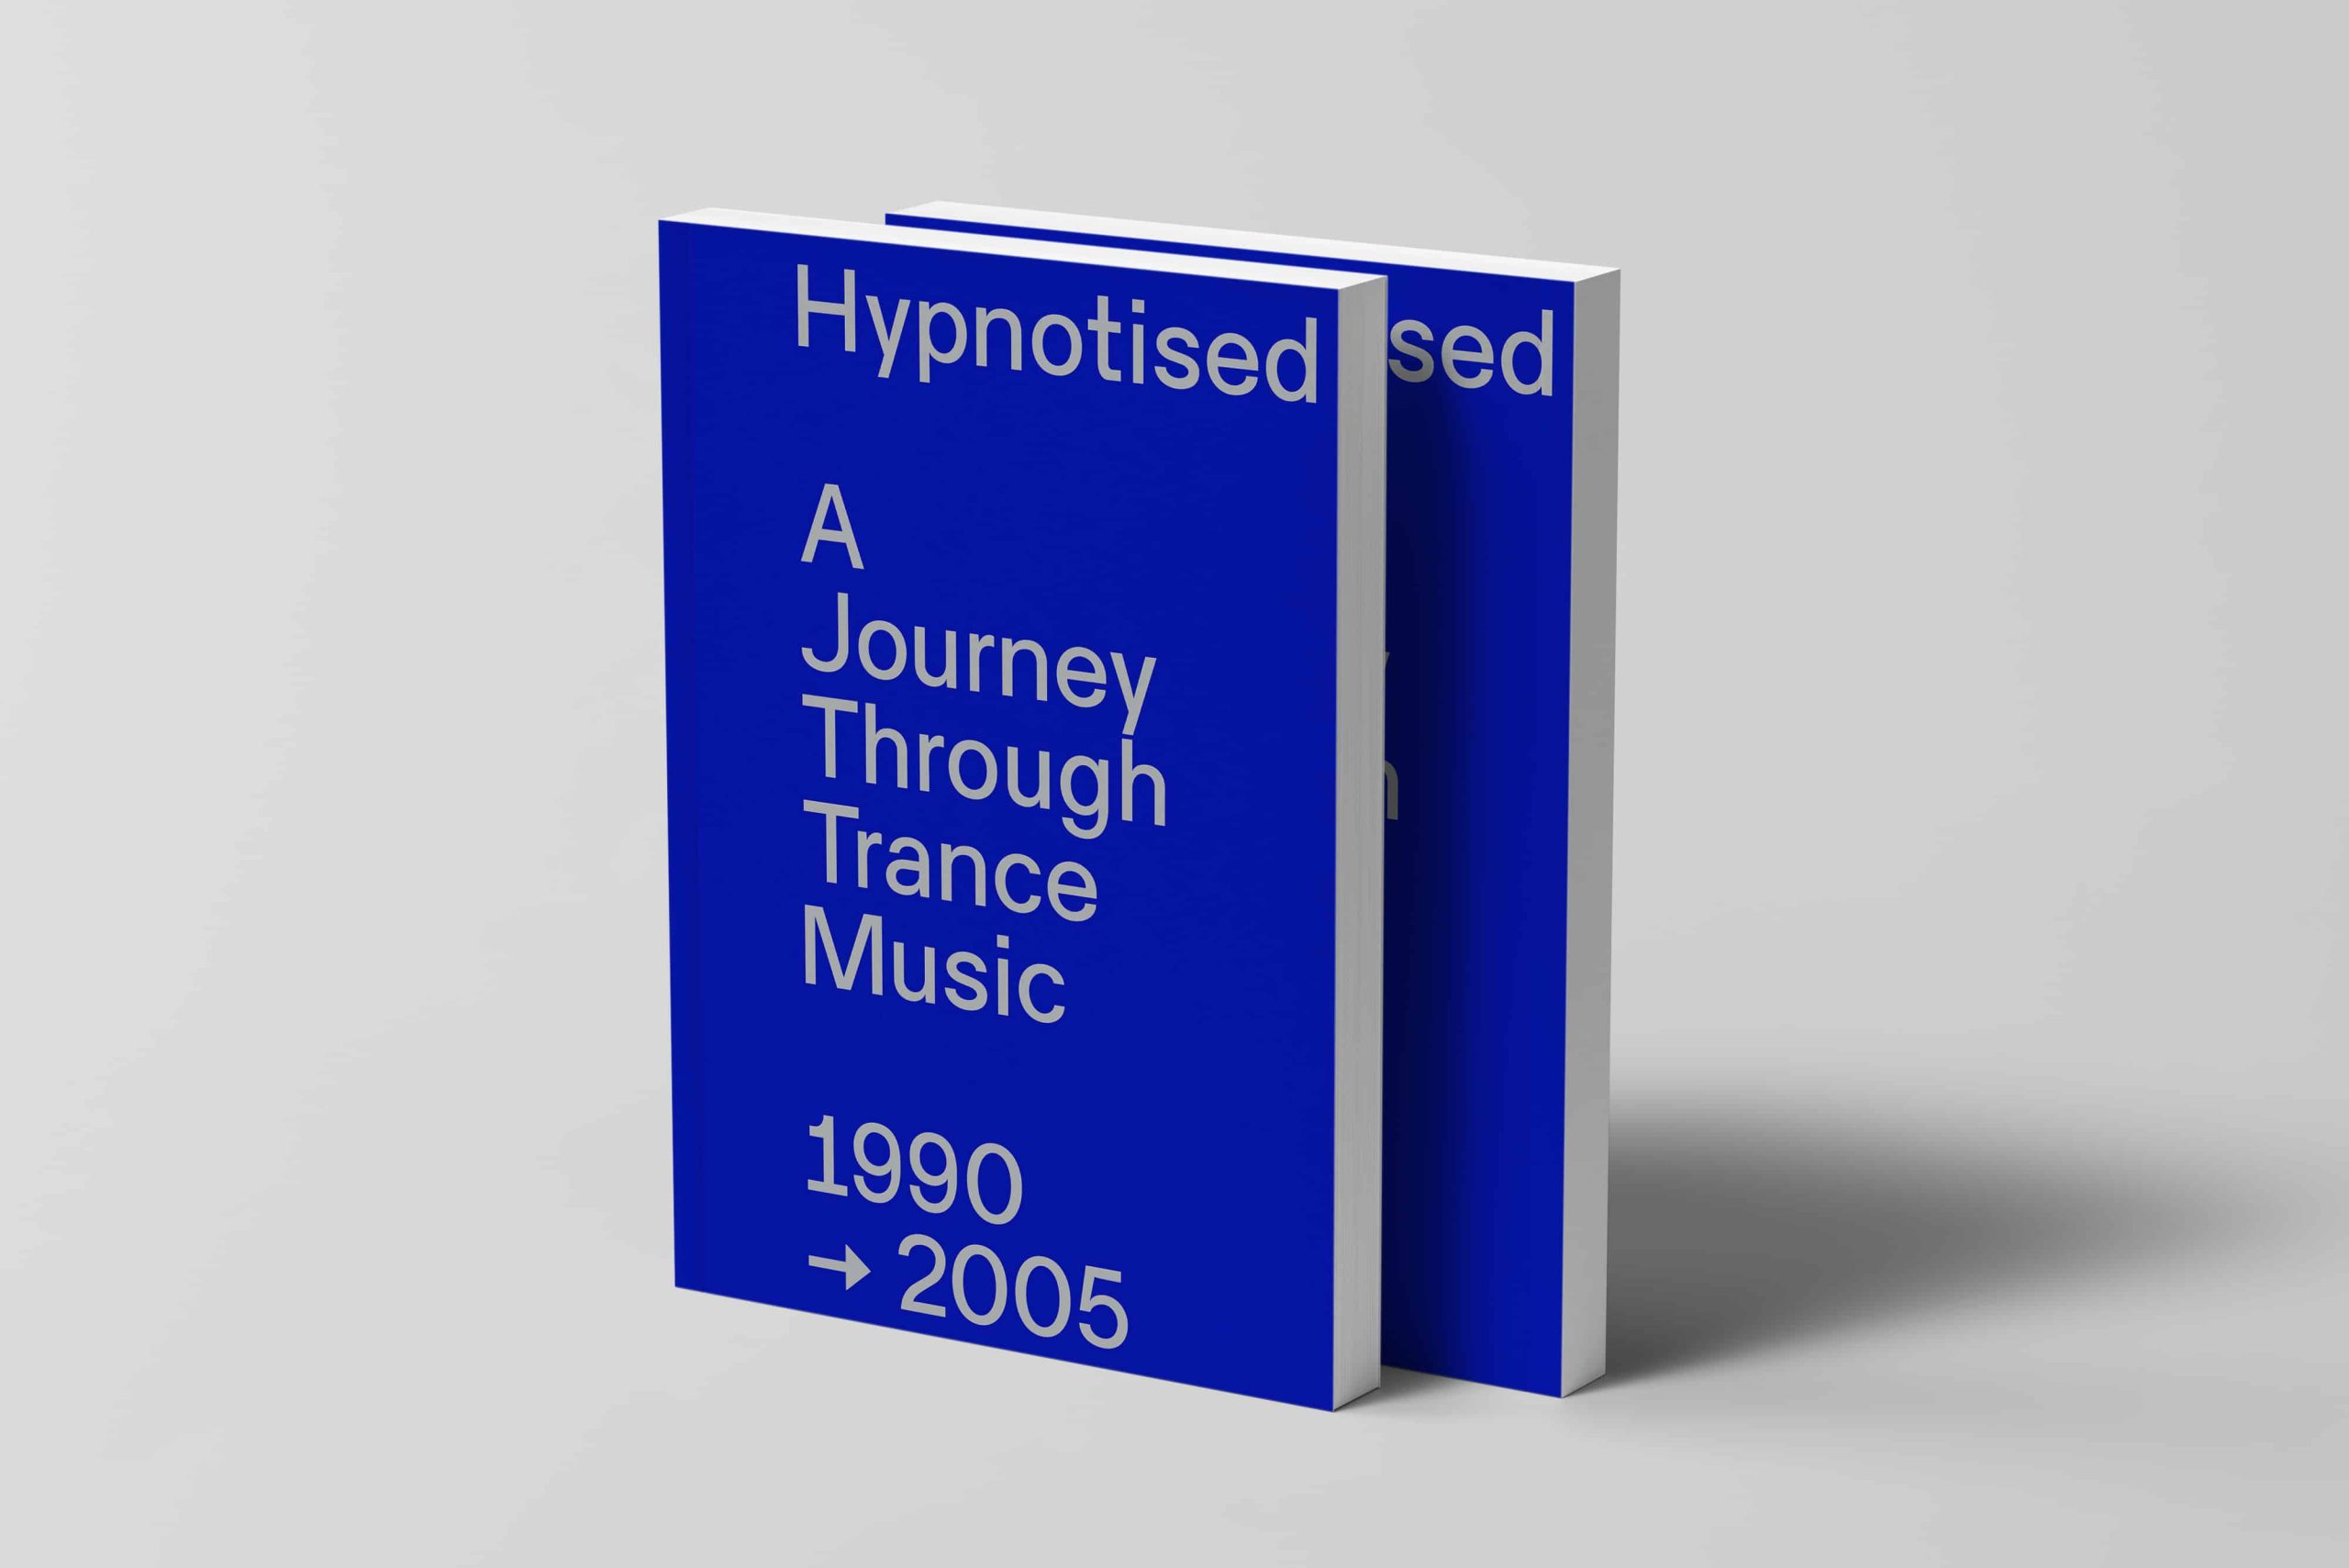 Hypnotised – A Journey Through Trance (1990-2005) book explores the genre's history